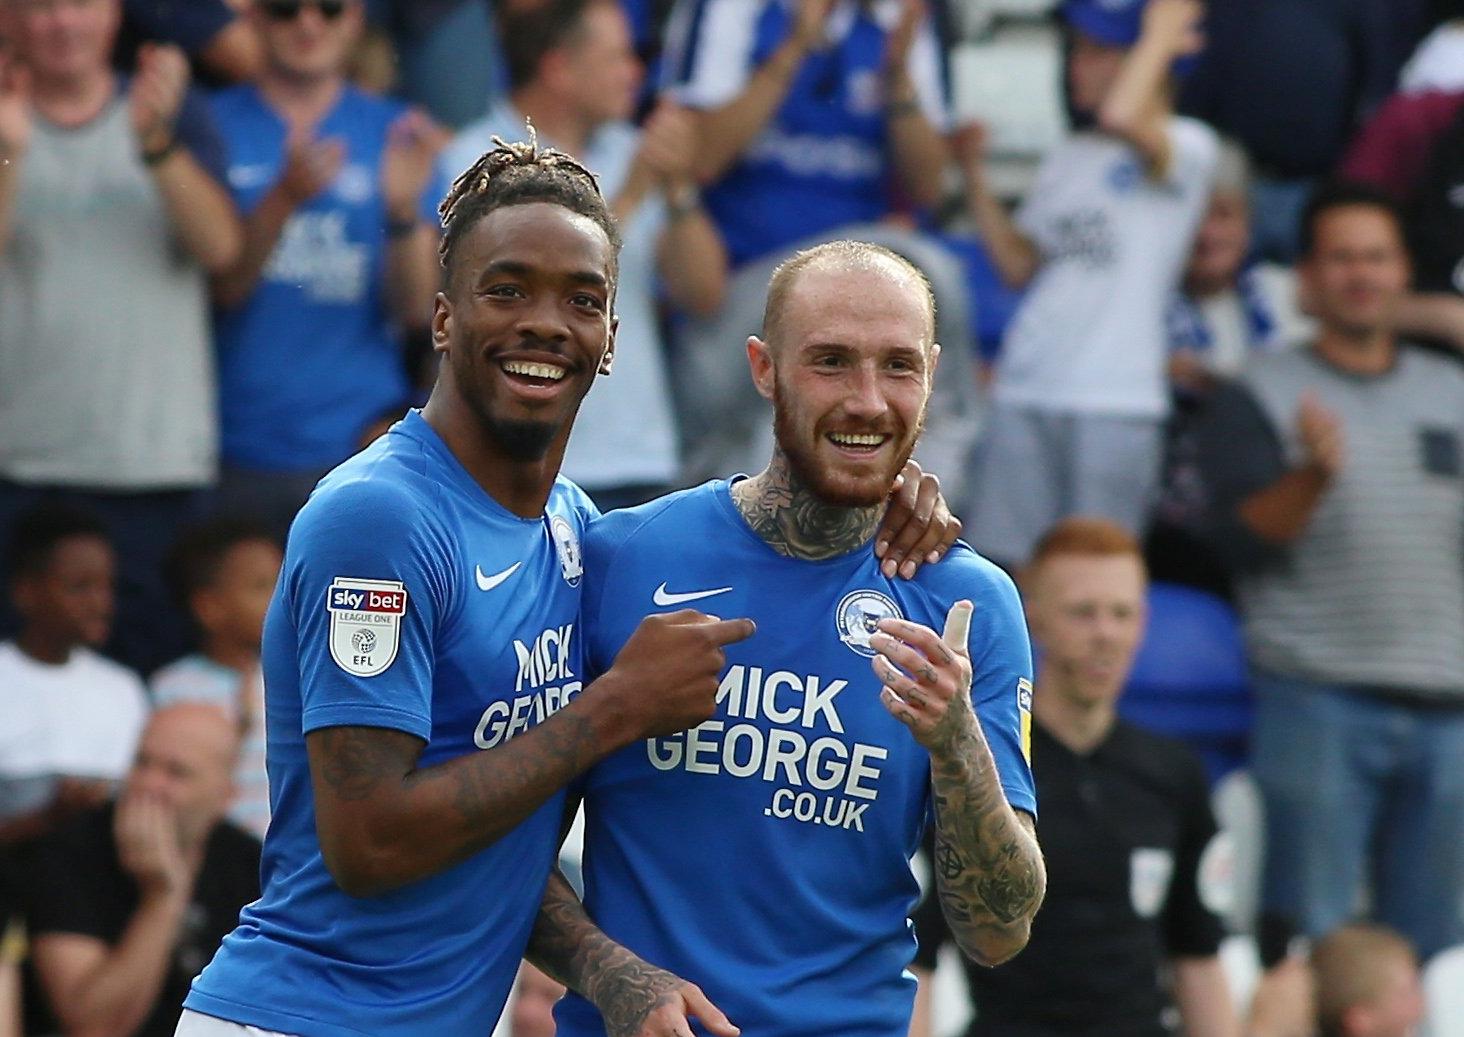 Toney was also top of the Posh scoring charts for  the year with 22 of the 84 scored by the team. Maddison (18) was second best with Mo Eisa, who has only been at the club since July, next on 15 followed by Joe Ward on six